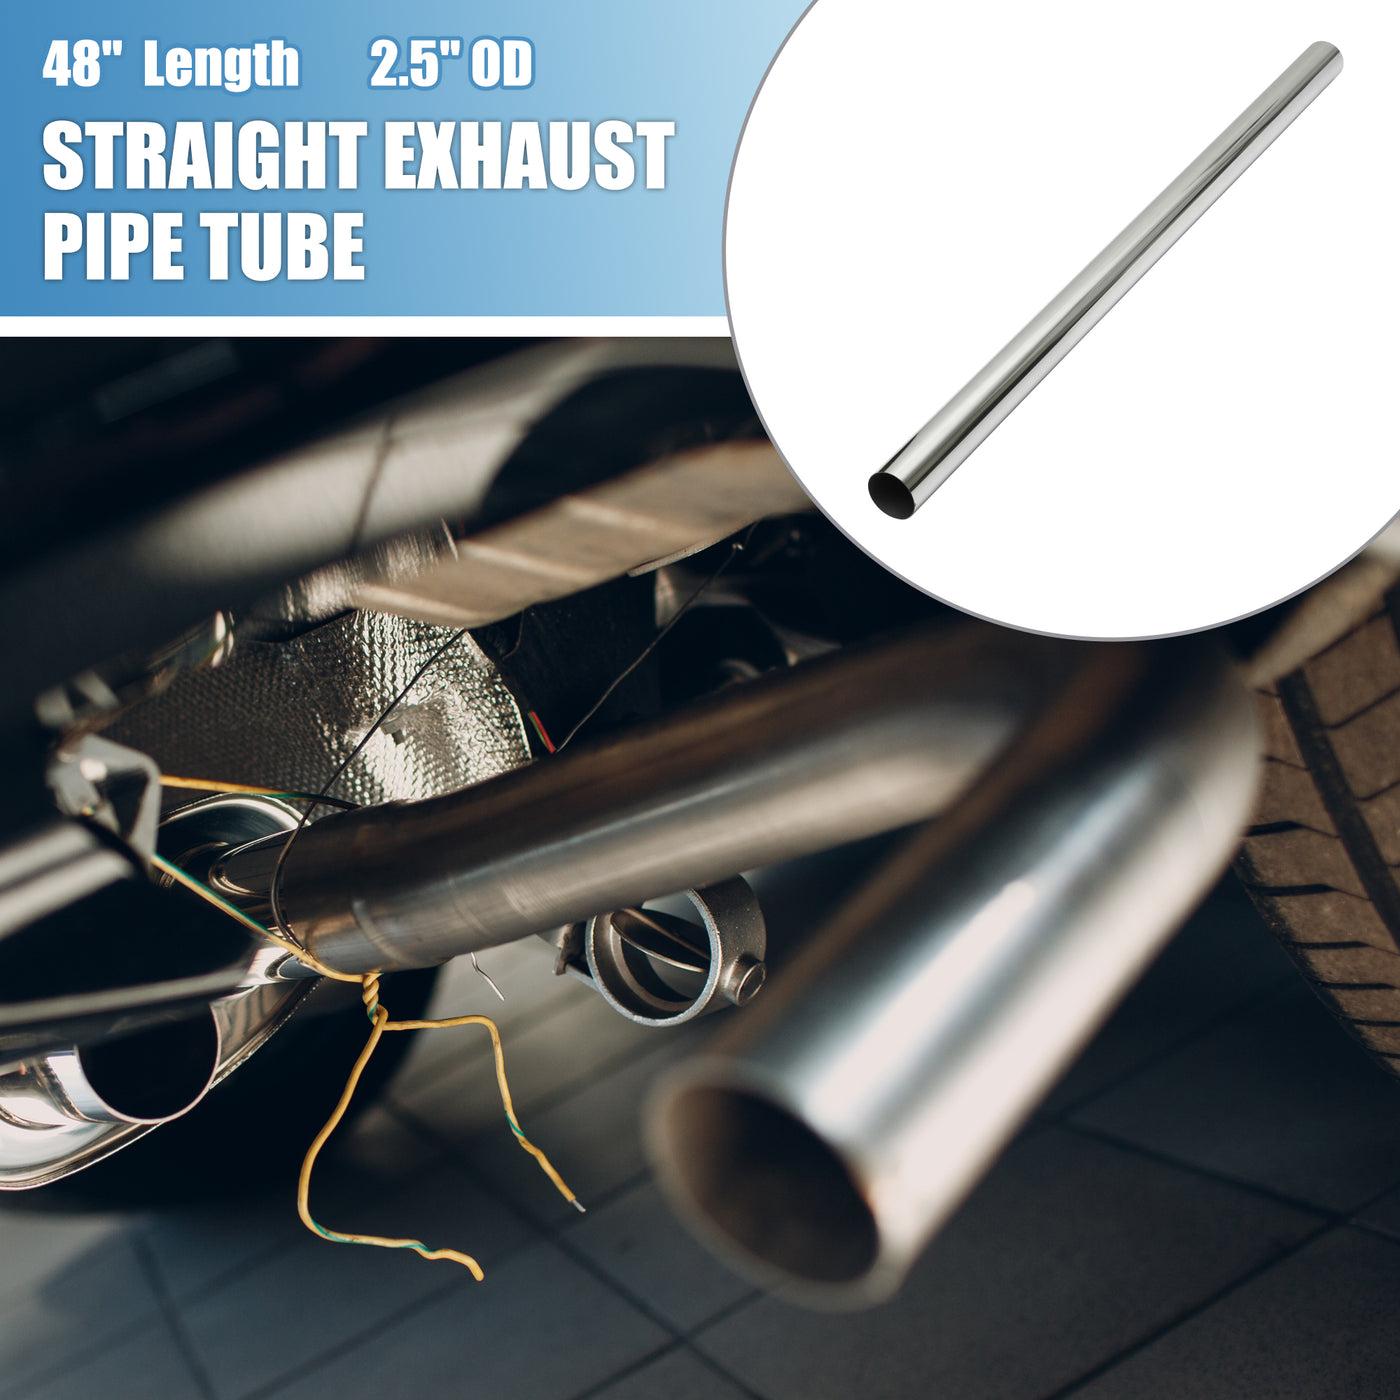 A ABSOPRO Car Mandrel Exhaust Pipe Tube Durable 48" Length 2.5'' OD Straight Exhaust Tube DIY Custom 0 Degree Modified Piping T304 Stainless Steel (Set of 2)